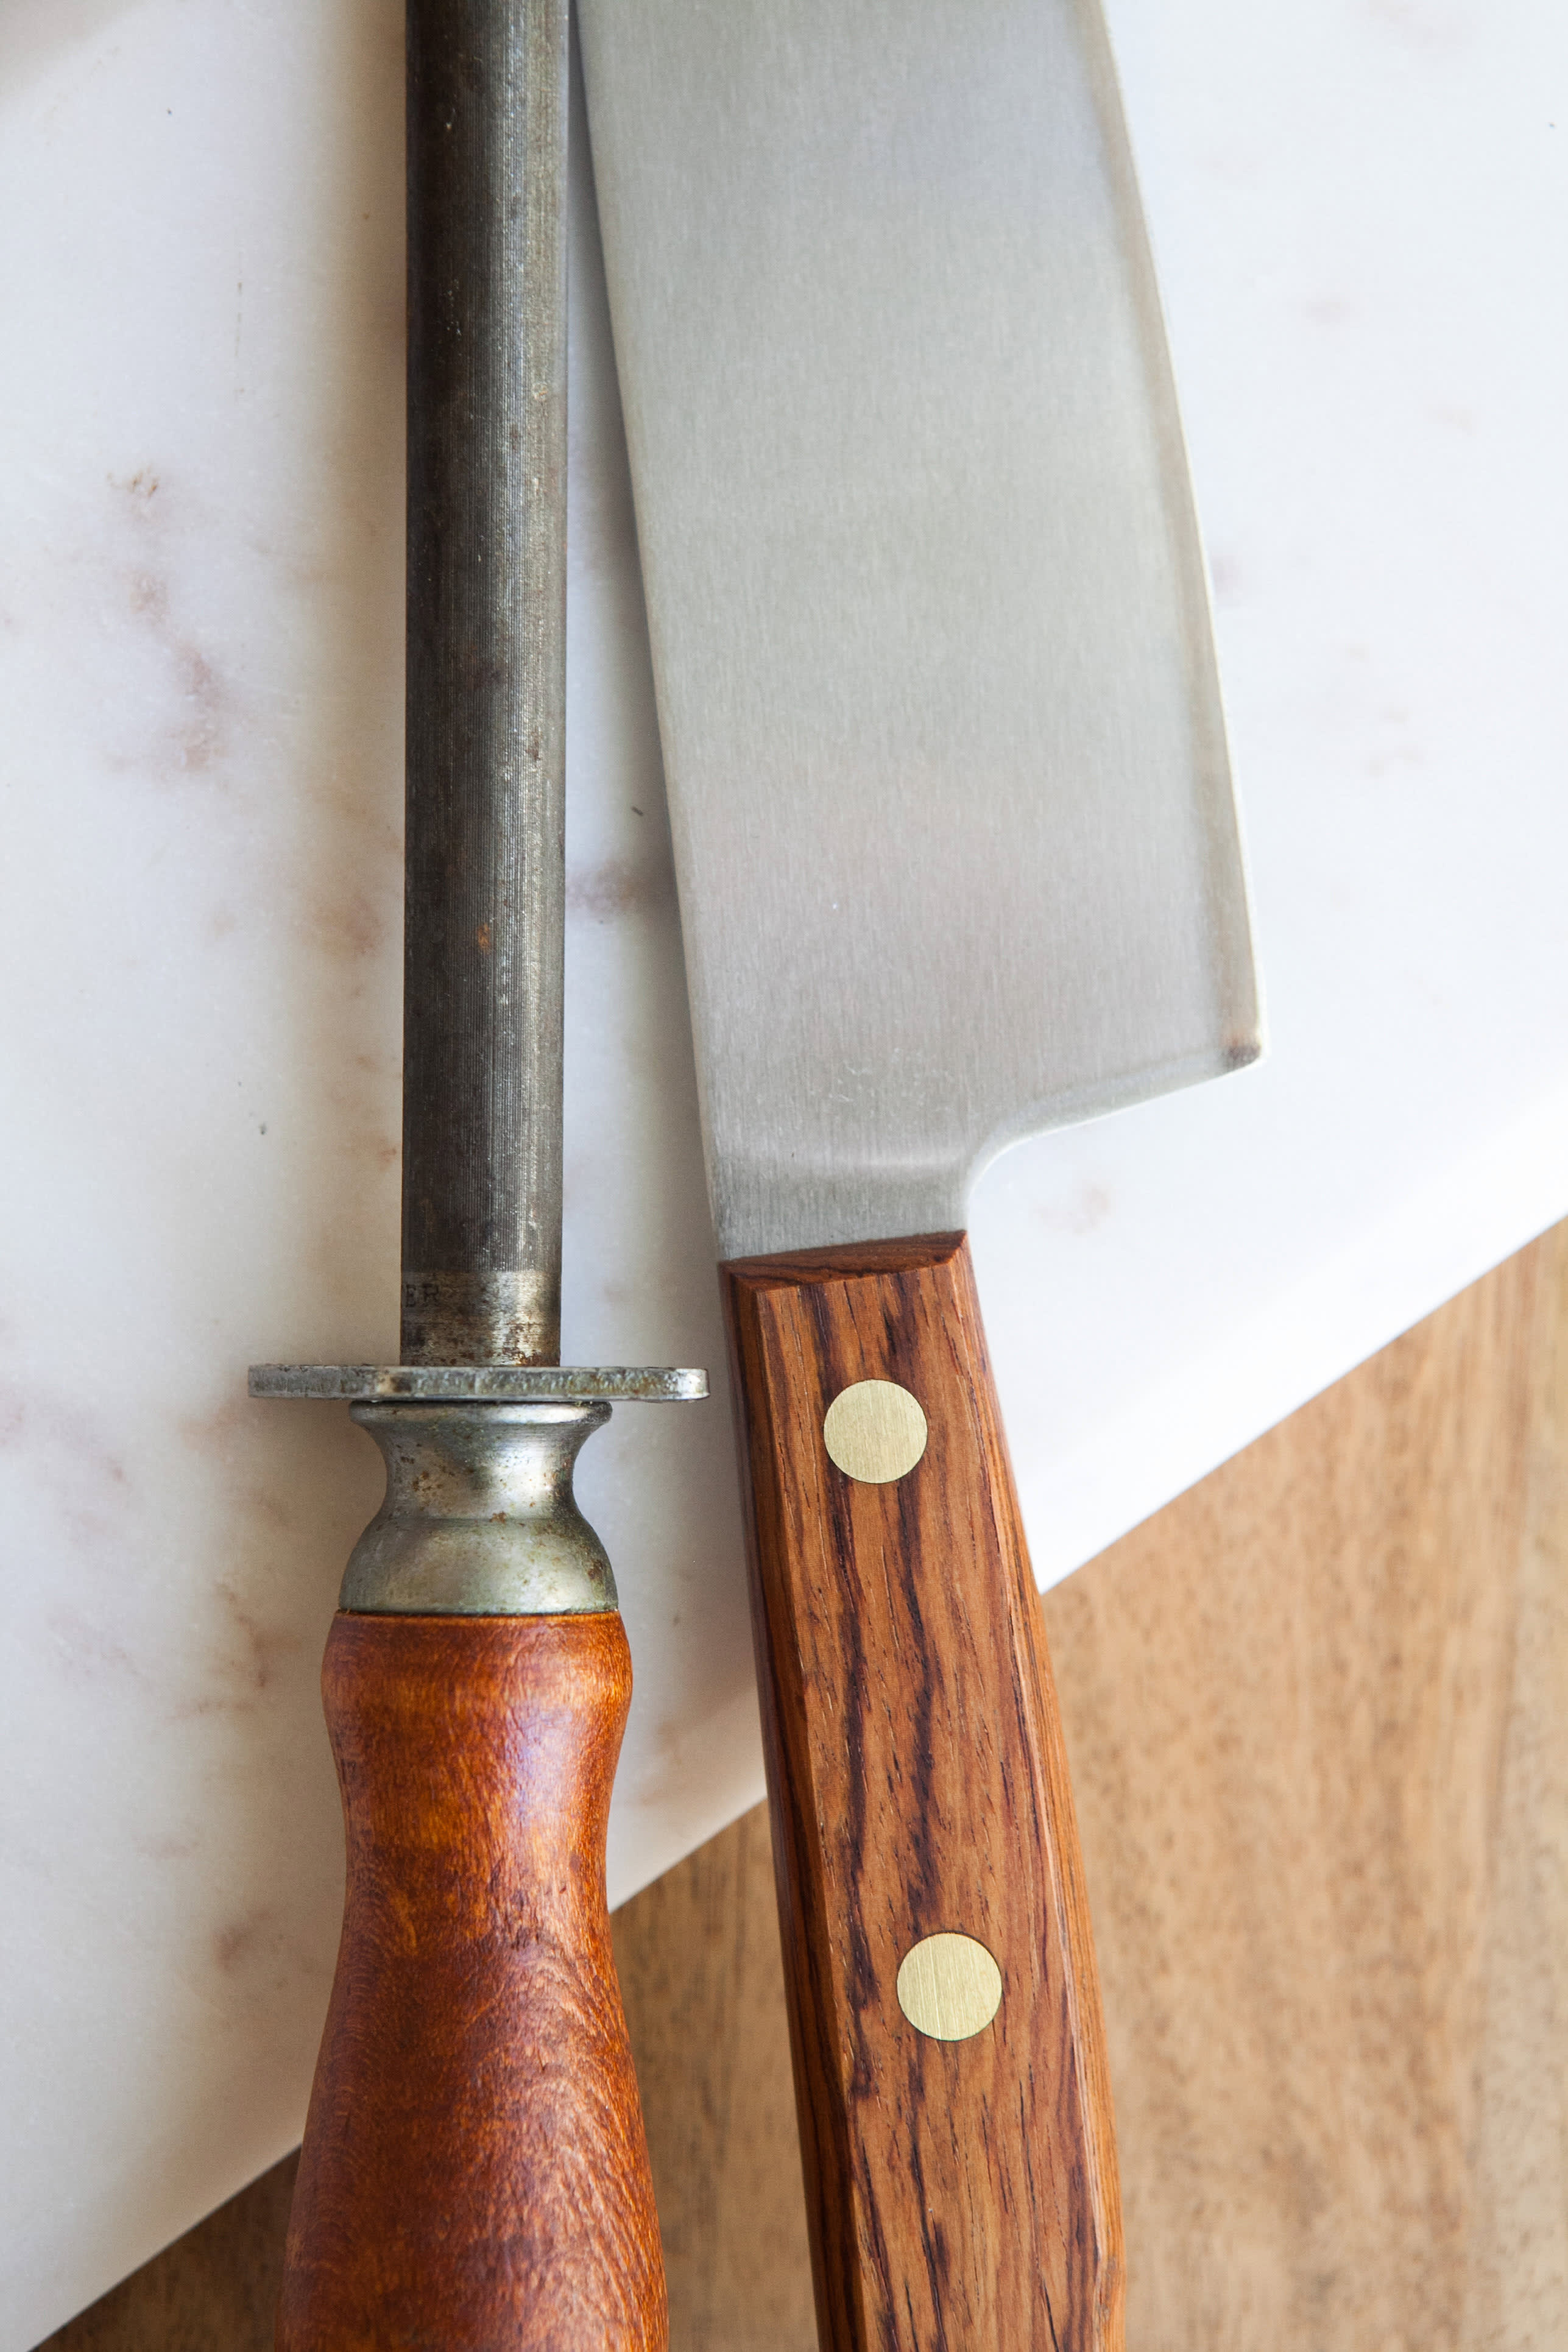 How to Care for a Carbon Steel Knife, According to an Expert